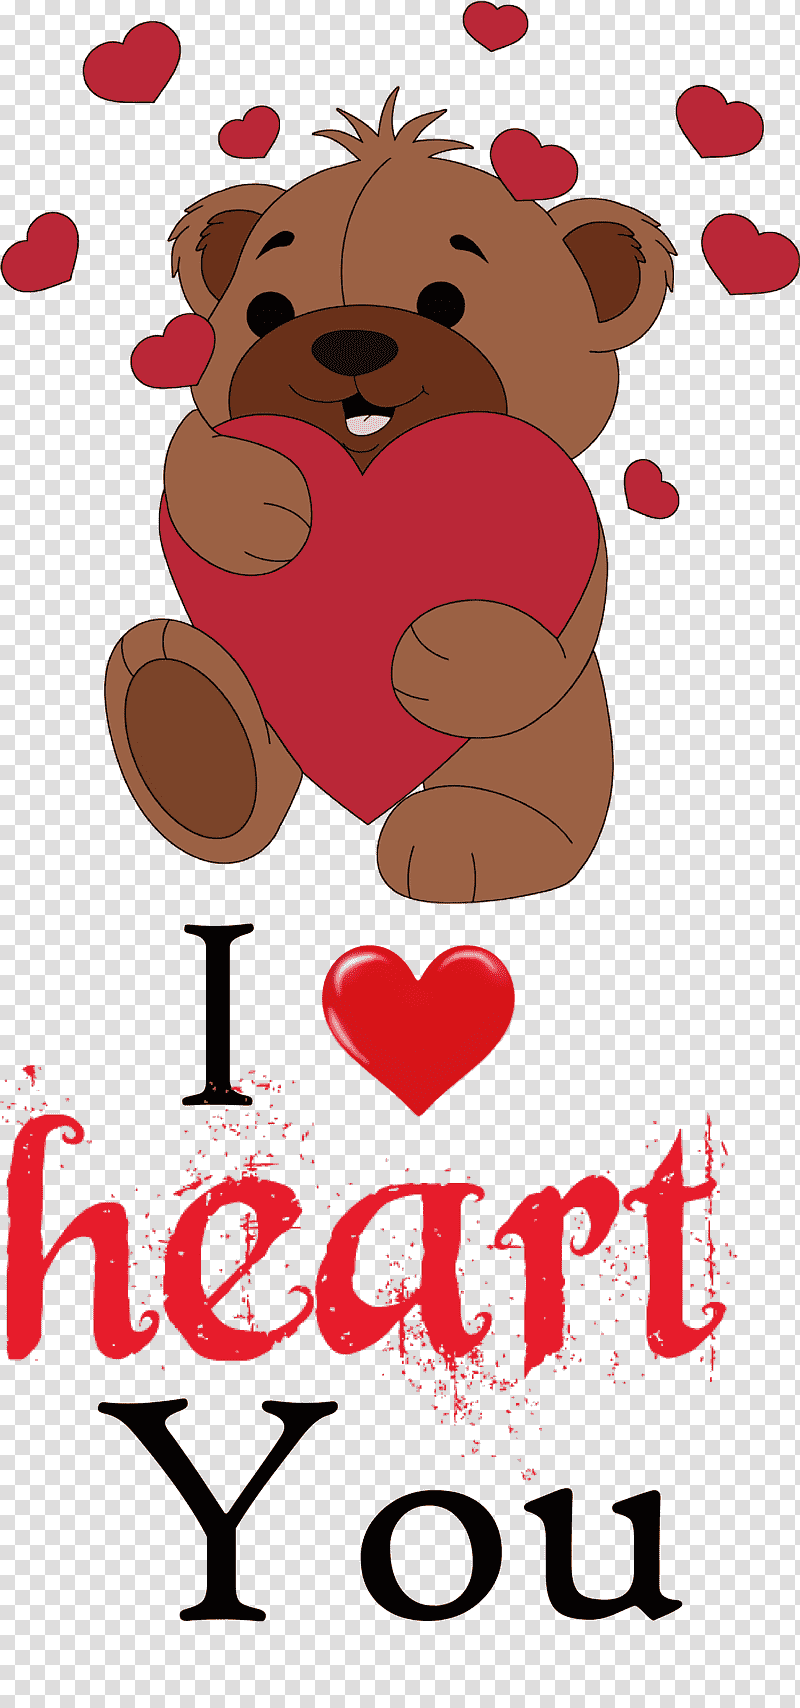 I Heart You Valentines Day Love, Meter, Poster, Teddy Bear, Cartoon, Bears, Velhas Virgens transparent background PNG clipart